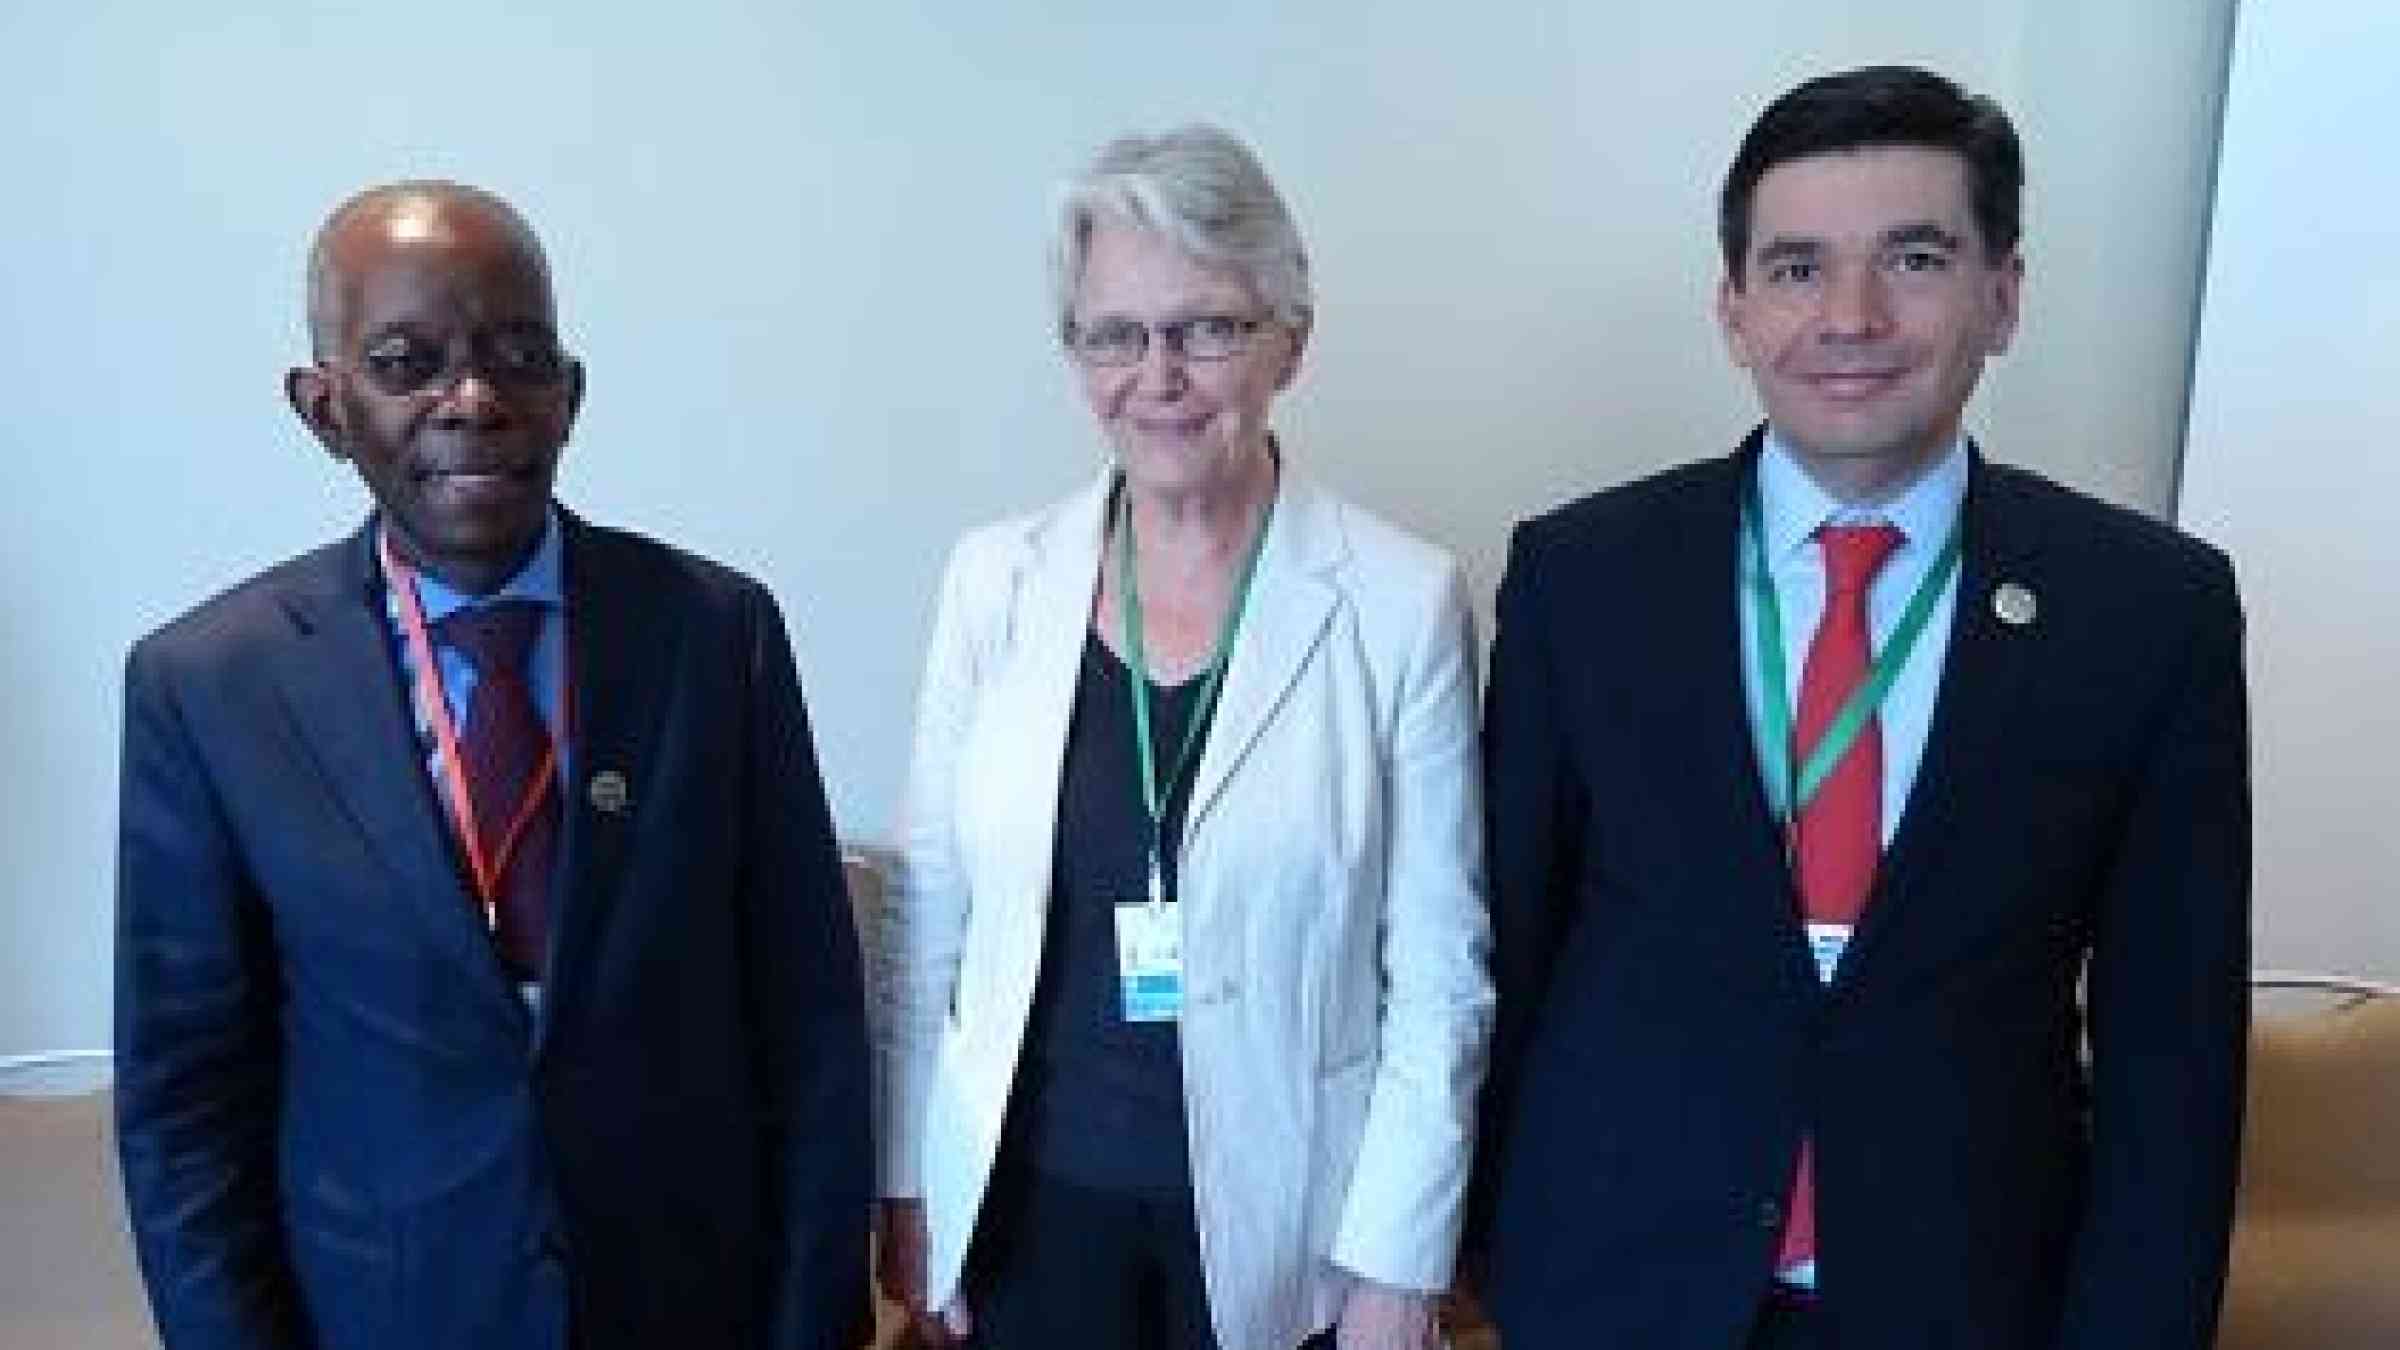 Finance ministries are key in disaster risk reduction. From left: Adriano Afonso Maleiane, Minister of Economy and Finance of Mozambique; Margareta Wahlström, Special Representative of the UN Secretary-General for Disaster Risk Reduction; Fernando Aportela, Under-Secretary at Mexico’s Ministry of Finance (Photo: UNISDR)